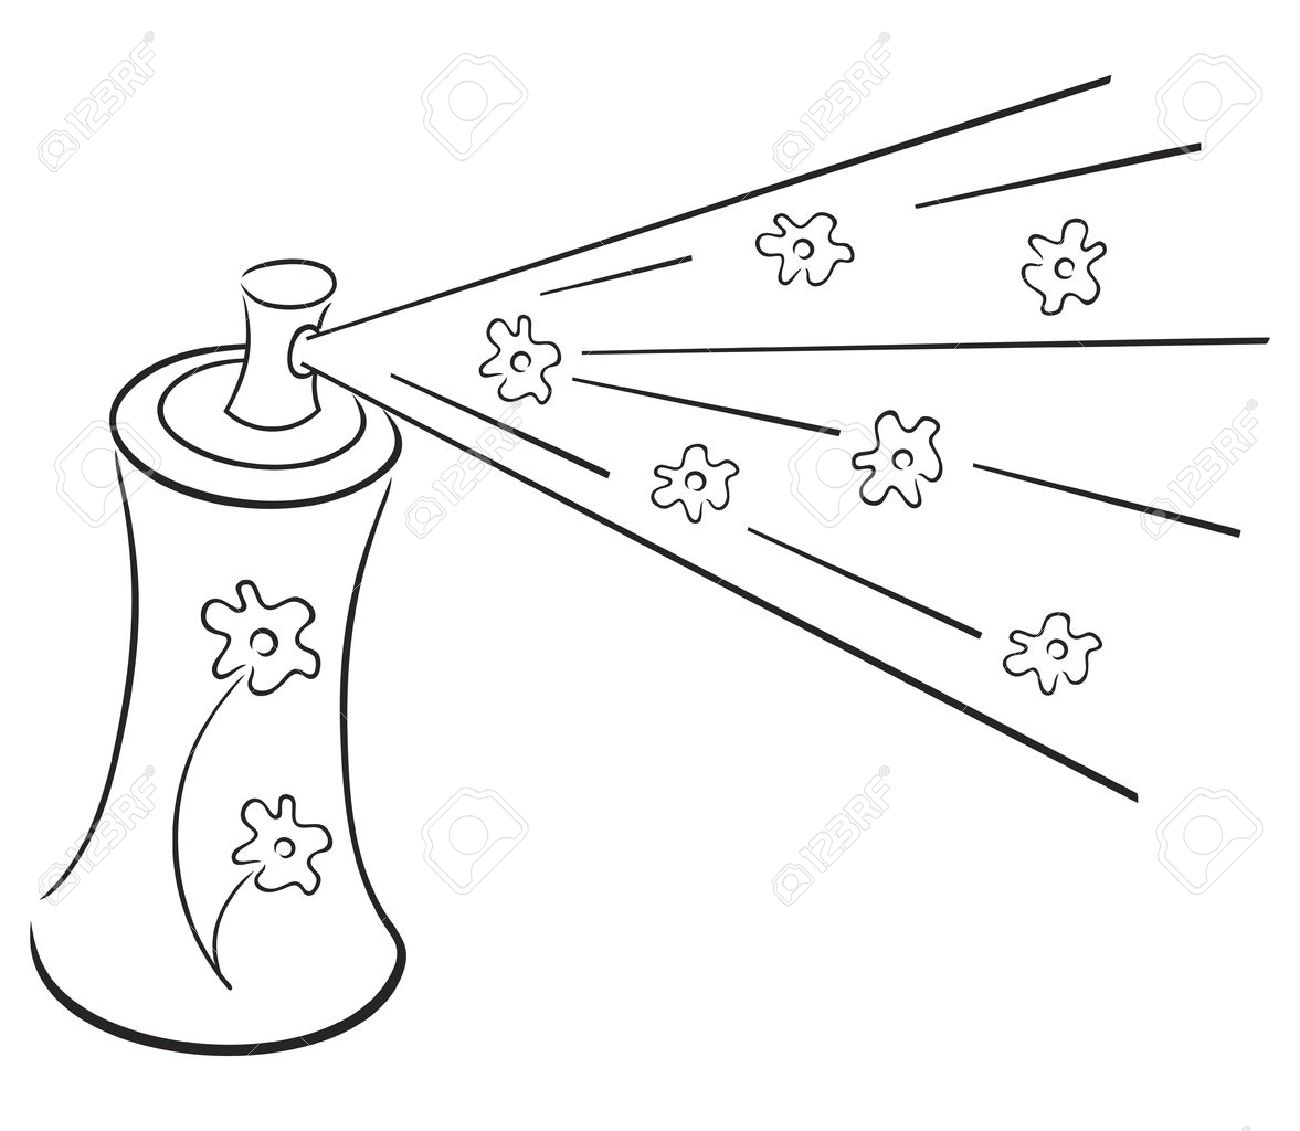 perfume clipart black and white